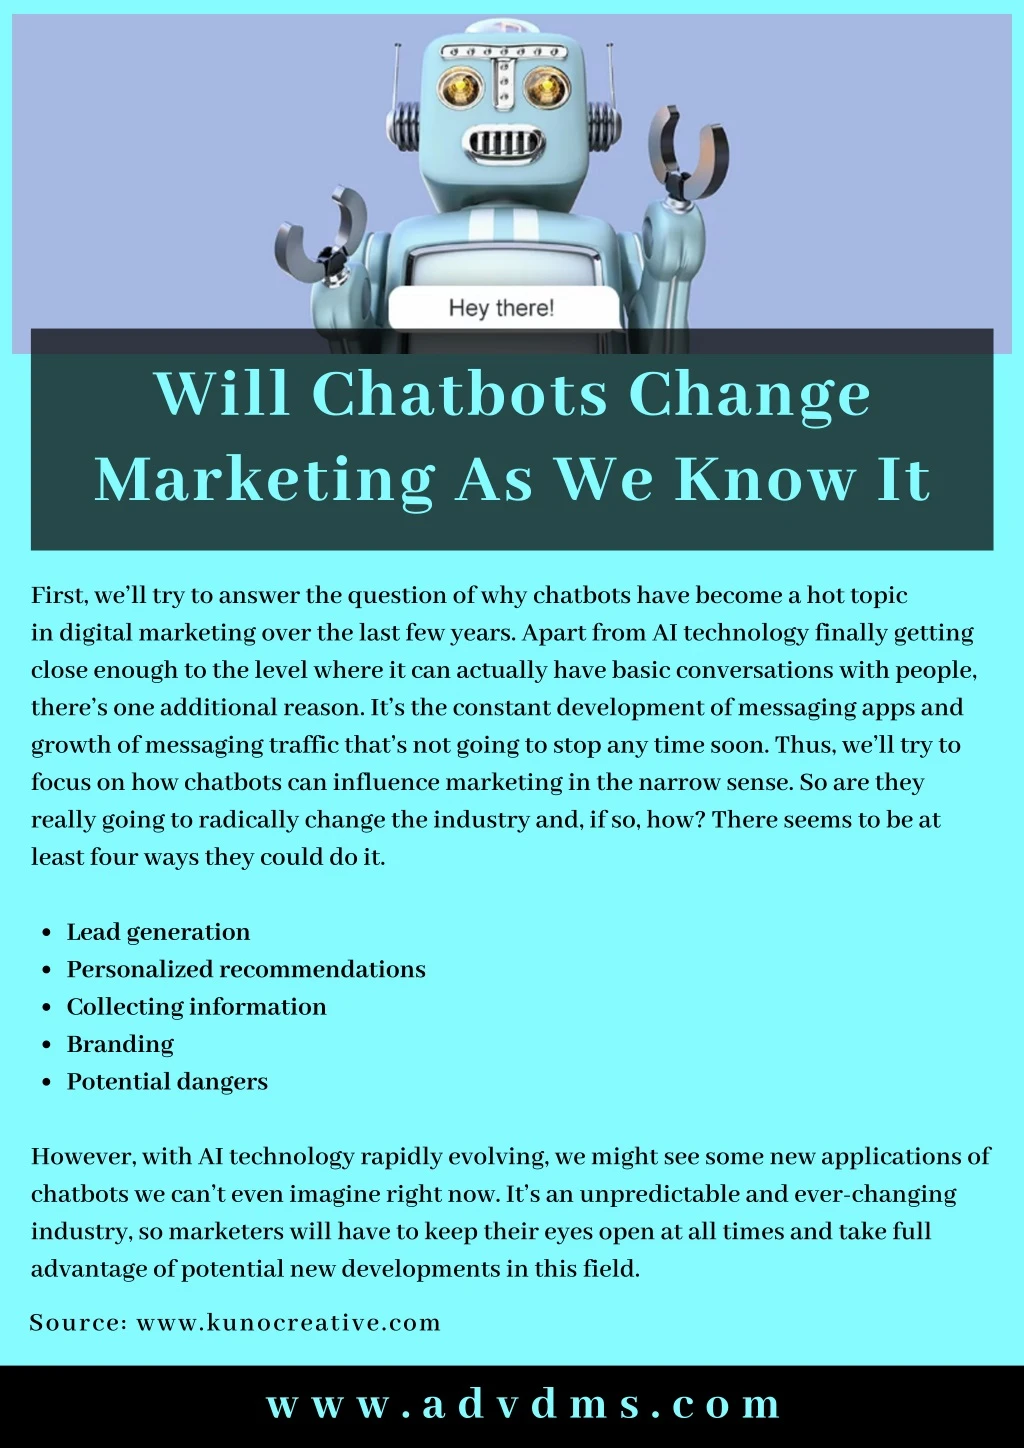 will chatbots change marketing as we know it